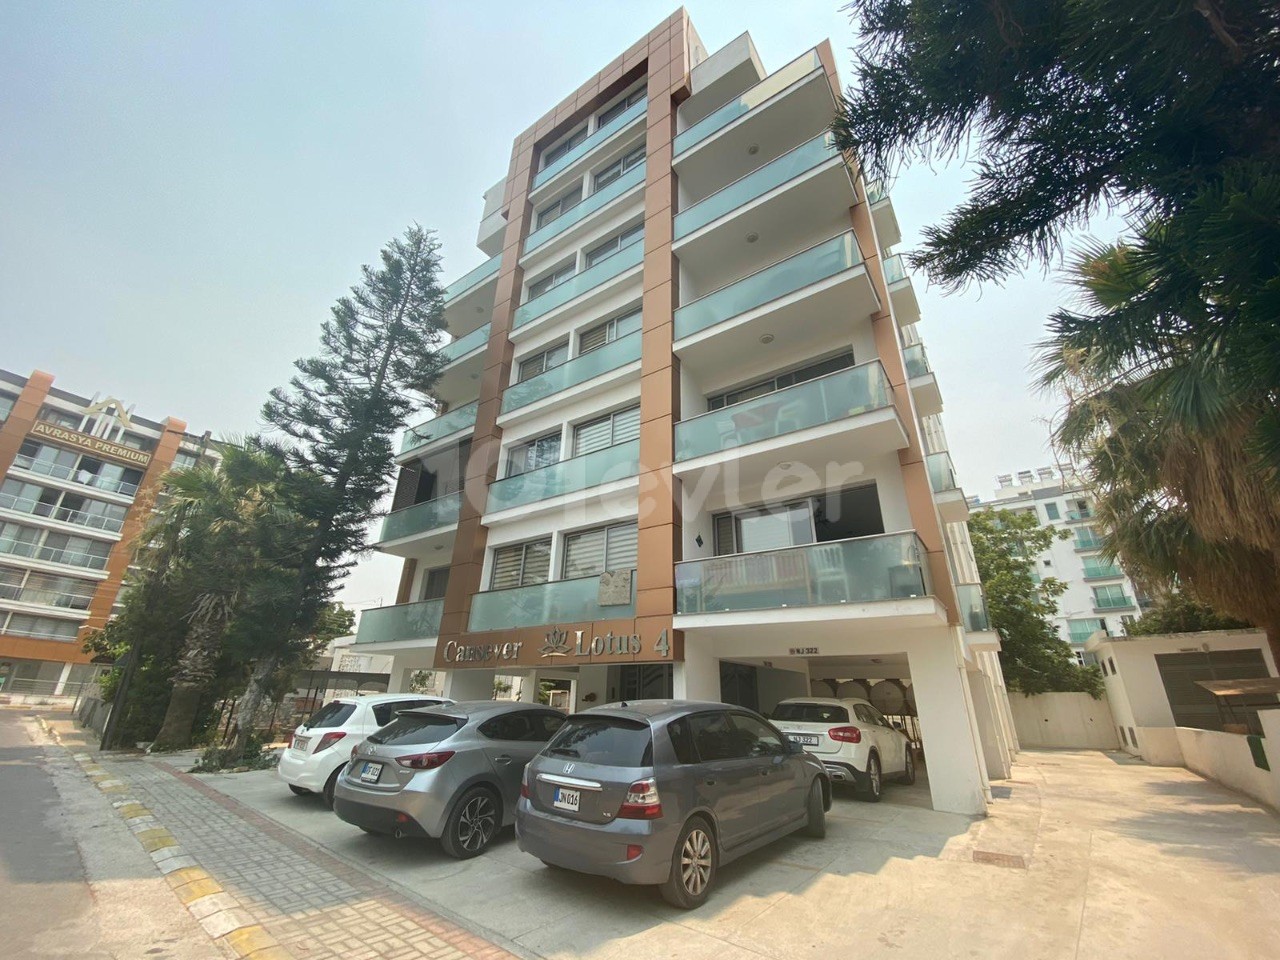 PANORAMİC VİEW OF KYRENİA , OUR WONDERFUL PETHOUSE APARTMENT İS NOW ON SALE.